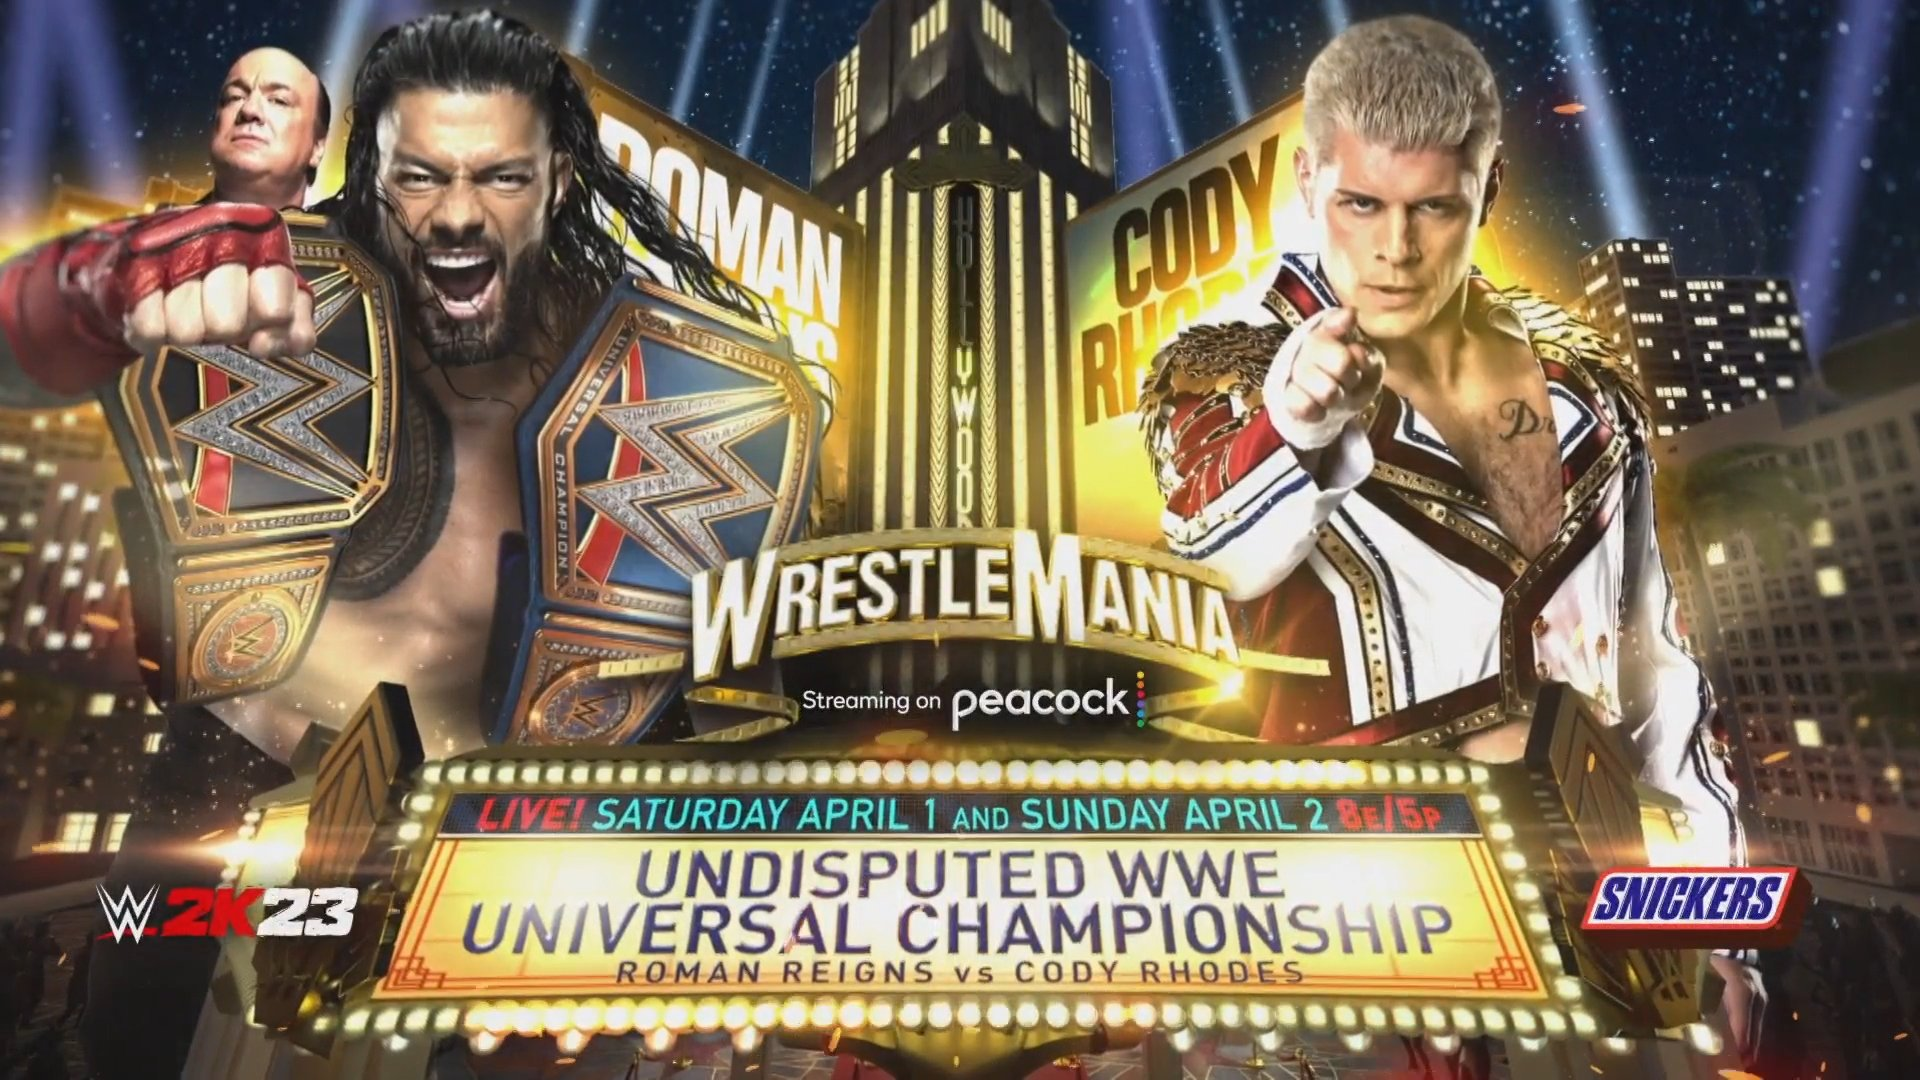 Match Card for the match between Roman Reigns (Left) and Cody Rhodes (Right). Behind Roman is the head of Paul Heyman who is Roman's 'Special Council' - Roman is holding the WWE Championship on his right shoulder and the Universal Championship on his left. At the bottom (from left to right) has 1 of the sponsors, WWE 2K23 video game, text saying "LIVE! Saturday April 1 and Sunday April 2 8E/5P Undisputed WWE Universal Championship Roman Reigns vs Cody Rhodes and on the right is another sponsor, Snickers. Behind the 2 men is a building with their names super-imposed on it.